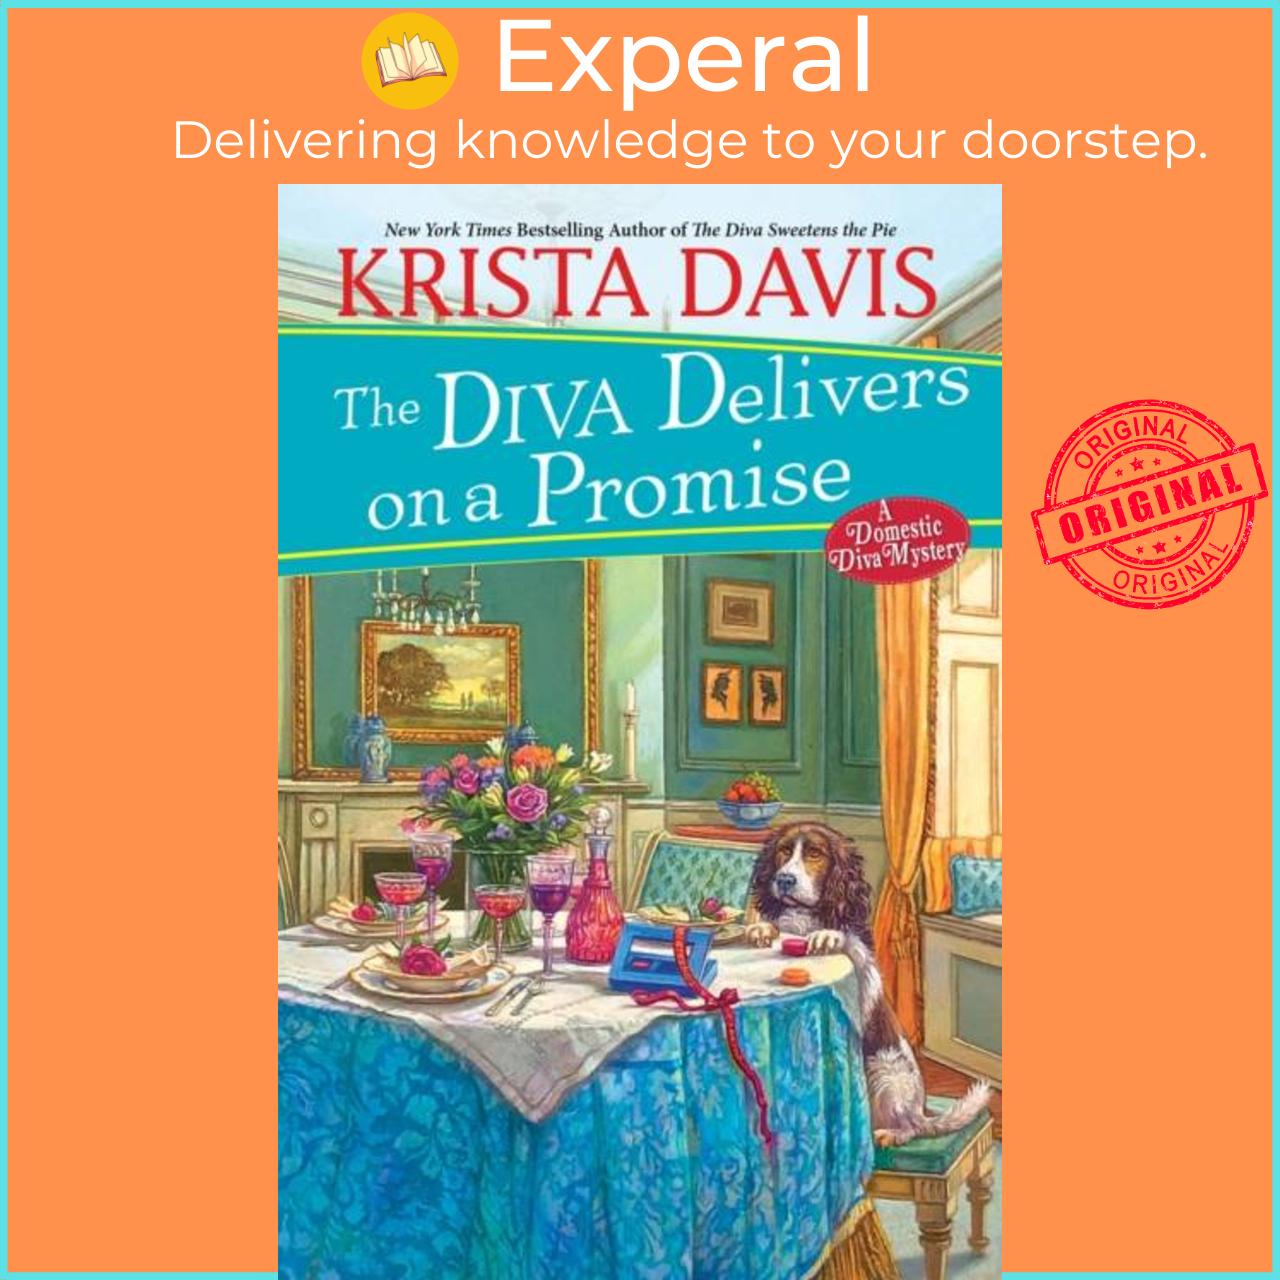 Hình ảnh Sách - The Diva Delivers on a Promise - A Deliciously Plotted Foodie Cozy Myster by Krista Davis (UK edition, hardcover)